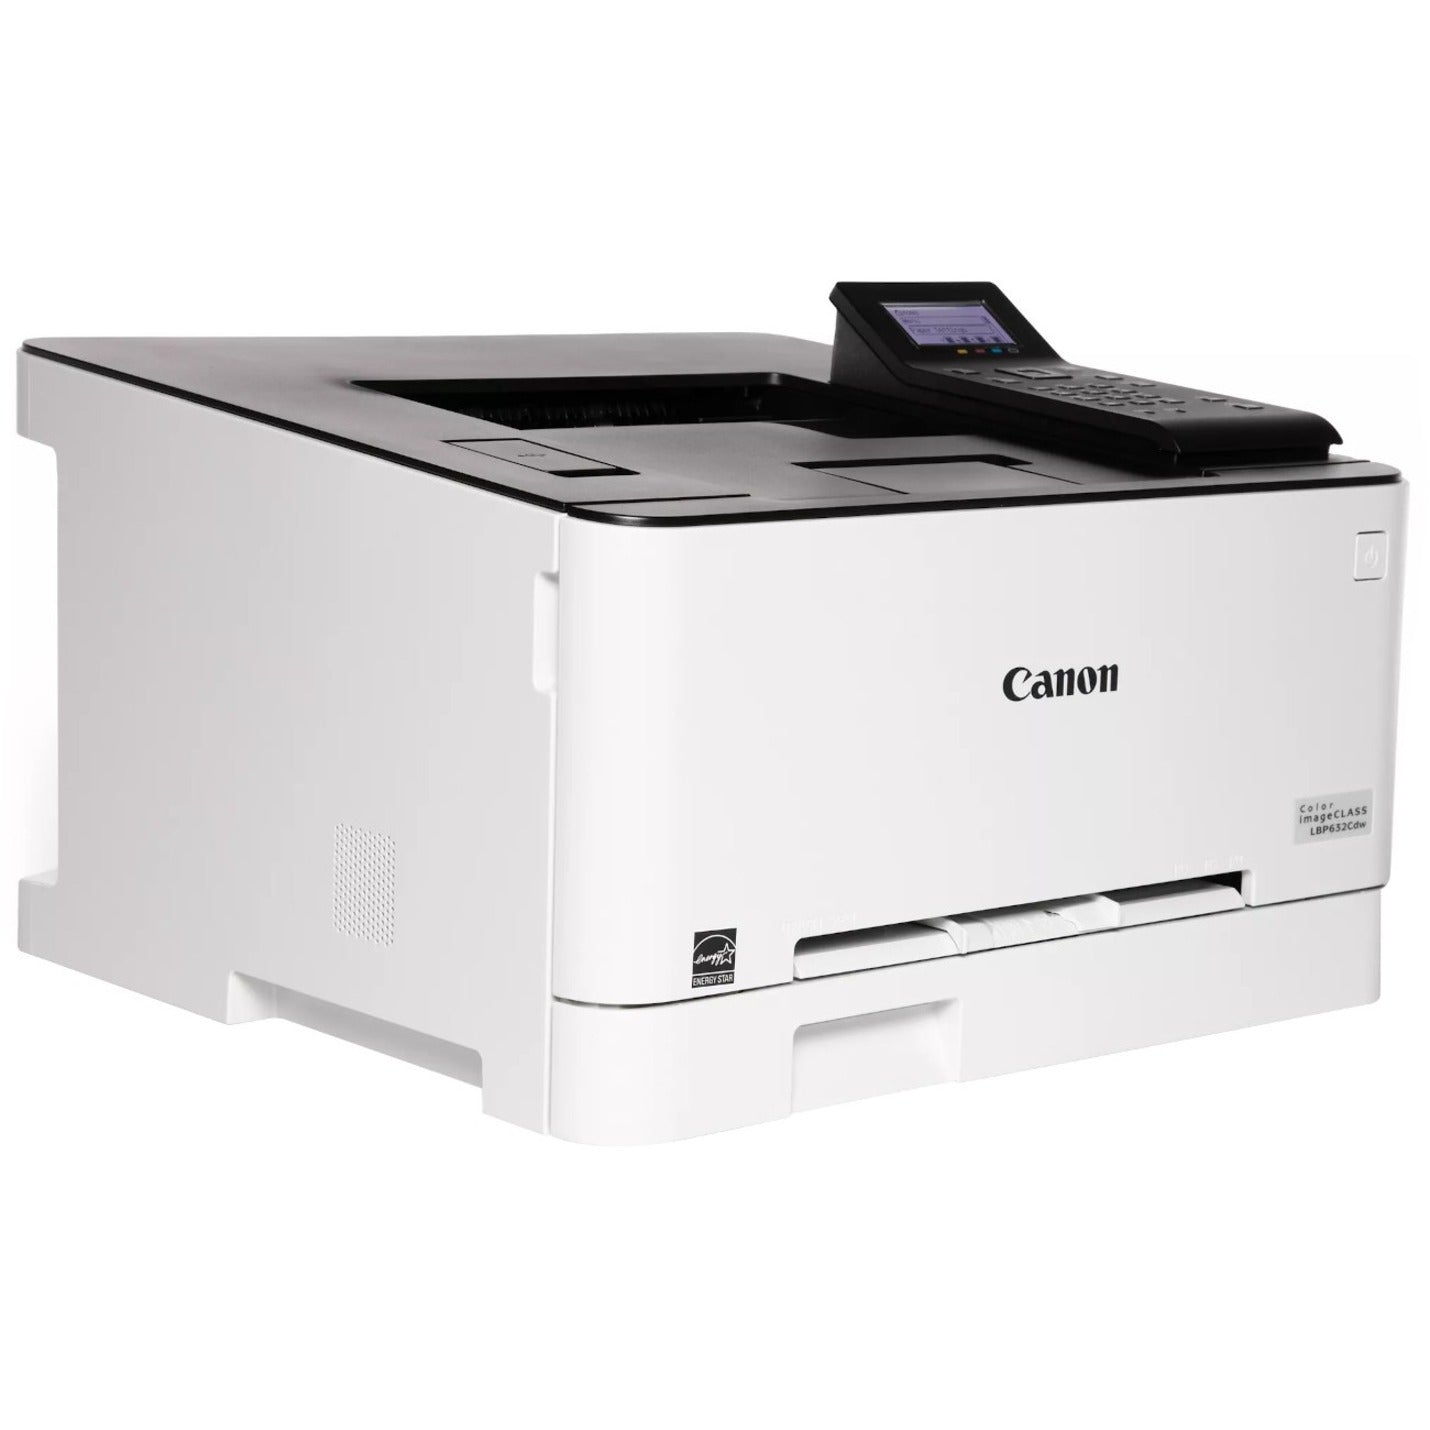 Canon 5159C003 imageCLASS LBP632Cdw Laser Printer, Fast Color Laser Output, WiFi Direct, Mobile Ready, 3 Year Warranty